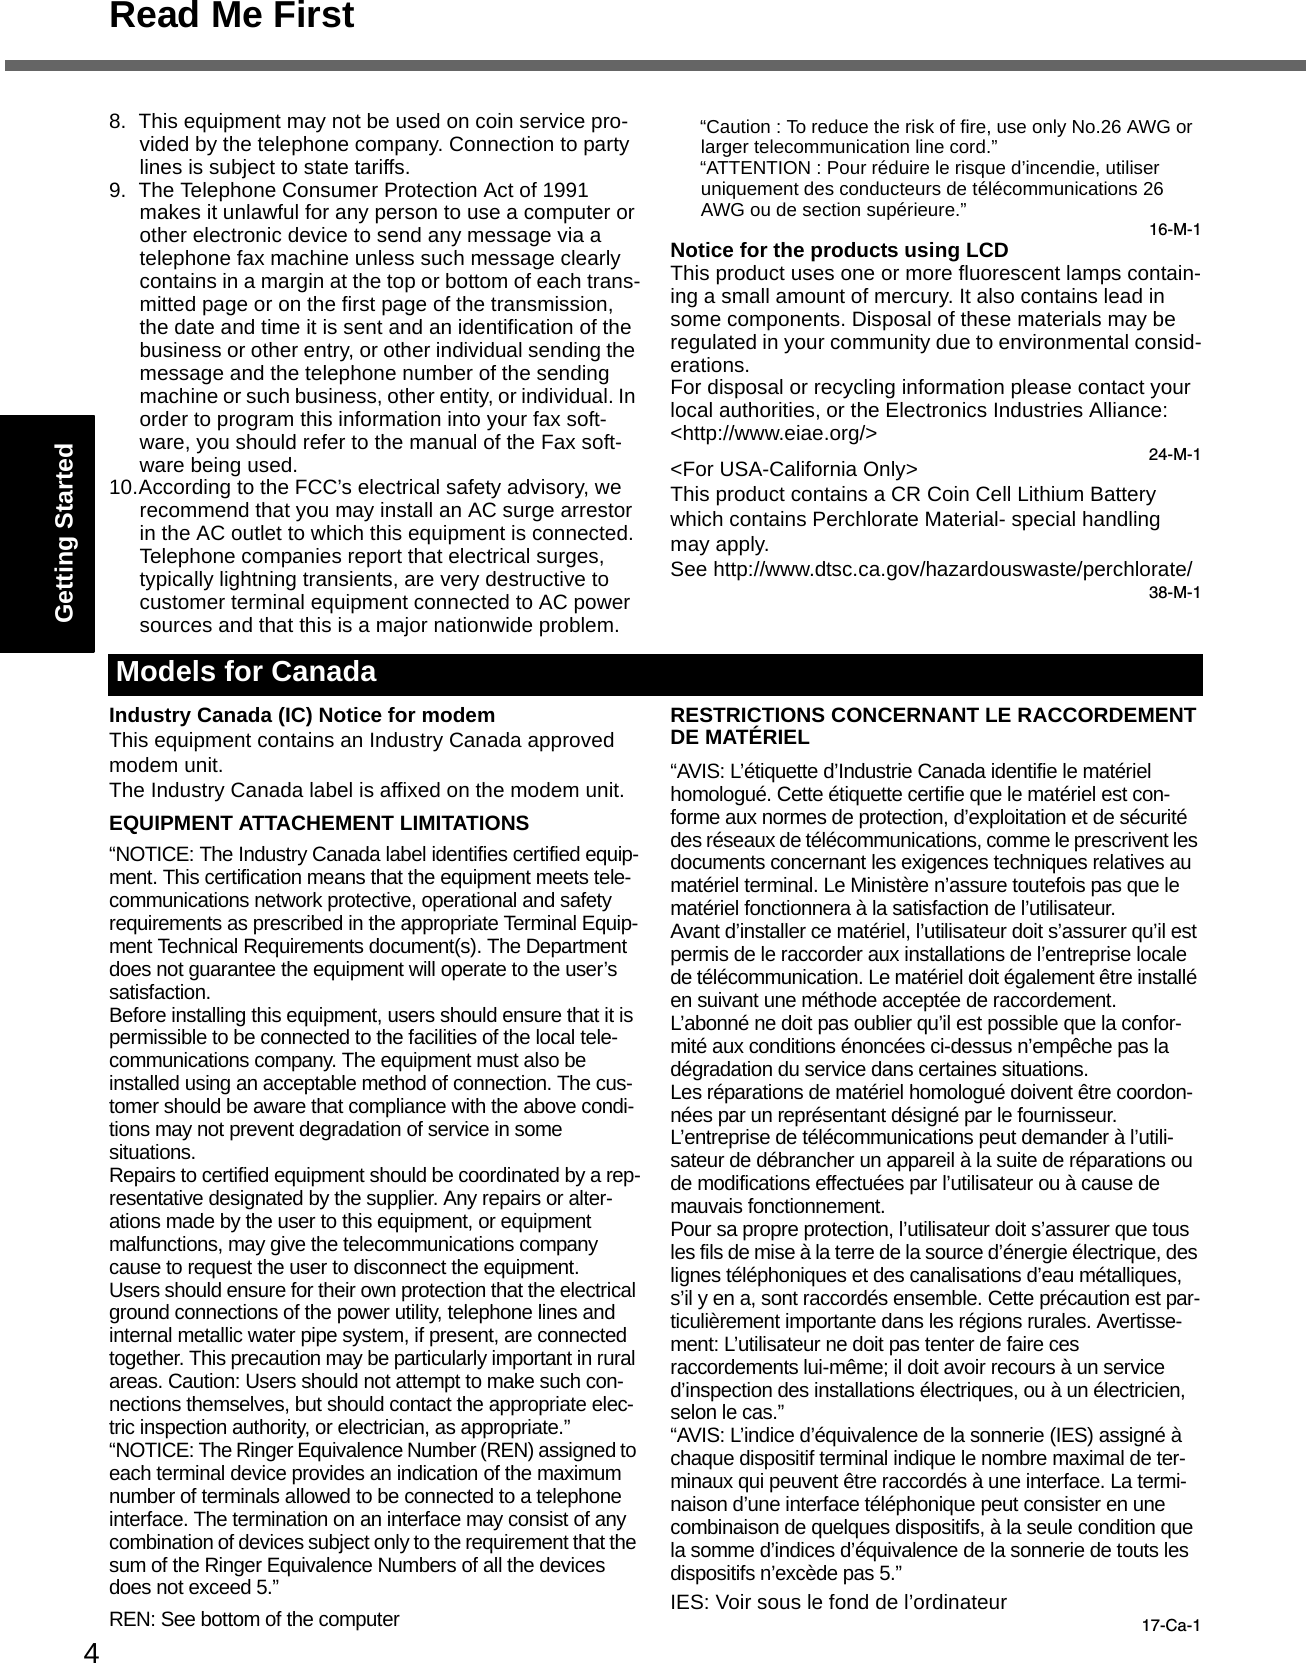 4Read Me FirstGetting StartedUseful InformationTroubleshootingAppendix8. This equipment may not be used on coin service pro-vided by the telephone company. Connection to party lines is subject to state tariffs.9. The Telephone Consumer Protection Act of 1991 makes it unlawful for any person to use a computer or other electronic device to send any message via a telephone fax machine unless such message clearly contains in a margin at the top or bottom of each trans-mitted page or on the first page of the transmission, the date and time it is sent and an identification of the business or other entry, or other individual sending the message and the telephone number of the sending machine or such business, other entity, or individual. In order to program this information into your fax soft-ware, you should refer to the manual of the Fax soft-ware being used.10.According to the FCC’s electrical safety advisory, we recommend that you may install an AC surge arrestor in the AC outlet to which this equipment is connected. Telephone companies report that electrical surges, typically lightning transients, are very destructive to customer terminal equipment connected to AC power sources and that this is a major nationwide problem.“Caution : To reduce the risk of fire, use only No.26 AWG or larger telecommunication line cord.”“ATTENTION : Pour réduire le risque d’incendie, utiliser uniquement des conducteurs de télécommunications 26 AWG ou de section supérieure.”16-M-1Notice for the products using LCDThis product uses one or more fluorescent lamps contain-ing a small amount of mercury. It also contains lead in some components. Disposal of these materials may be regulated in your community due to environmental consid-erations. For disposal or recycling information please contact your local authorities, or the Electronics Industries Alliance: &lt;http://www.eiae.org/&gt;24-M-1&lt;For USA-California Only&gt;This product contains a CR Coin Cell Lithium Battery which contains Perchlorate Material- special handling may apply.See http://www.dtsc.ca.gov/hazardouswaste/perchlorate/38-M-1Industry Canada (IC) Notice for modemThis equipment contains an Industry Canada approved modem unit.The Industry Canada label is affixed on the modem unit.EQUIPMENT ATTACHEMENT LIMITATIONS“NOTICE: The Industry Canada label identifies certified equip-ment. This certification means that the equipment meets tele-communications network protective, operational and safety requirements as prescribed in the appropriate Terminal Equip-ment Technical Requirements document(s). The Department does not guarantee the equipment will operate to the user’s satisfaction.Before installing this equipment, users should ensure that it is permissible to be connected to the facilities of the local tele-communications company. The equipment must also be installed using an acceptable method of connection. The cus-tomer should be aware that compliance with the above condi-tions may not prevent degradation of service in some situations.Repairs to certified equipment should be coordinated by a rep-resentative designated by the supplier. Any repairs or alter-ations made by the user to this equipment, or equipment malfunctions, may give the telecommunications company cause to request the user to disconnect the equipment.Users should ensure for their own protection that the electrical ground connections of the power utility, telephone lines and internal metallic water pipe system, if present, are connected together. This precaution may be particularly important in rural areas. Caution: Users should not attempt to make such con-nections themselves, but should contact the appropriate elec-tric inspection authority, or electrician, as appropriate.”“NOTICE: The Ringer Equivalence Number (REN) assigned to each terminal device provides an indication of the maximum number of terminals allowed to be connected to a telephone interface. The termination on an interface may consist of any combination of devices subject only to the requirement that the sum of the Ringer Equivalence Numbers of all the devices does not exceed 5.”REN: See bottom of the computerRESTRICTIONS CONCERNANT LE RACCORDEMENTDE MATÉRIEL“AVIS: L’étiquette d’Industrie Canada identifie le matériel homologué. Cette étiquette certifie que le matériel est con-forme aux normes de protection, d’exploitation et de sécurité des réseaux de télécommunications, comme le prescrivent les documents concernant les exigences techniques relatives au matériel terminal. Le Ministère n’assure toutefois pas que le matériel fonctionnera à la satisfaction de l’utilisateur.Avant d’installer ce matériel, l’utilisateur doit s’assurer qu’il est permis de le raccorder aux installations de l’entreprise locale de télécommunication. Le matériel doit également être installé en suivant une méthode acceptée de raccordement.L’abonné ne doit pas oublier qu’il est possible que la confor-mité aux conditions énoncées ci-dessus n’empêche pas la dégradation du service dans certaines situations.Les réparations de matériel homologué doivent être coordon-nées par un représentant désigné par le fournisseur.L’entreprise de télécommunications peut demander à l’utili-sateur de débrancher un appareil à la suite de réparations ou de modifications effectuées par l’utilisateur ou à cause de mauvais fonctionnement.Pour sa propre protection, l’utilisateur doit s’assurer que tous les fils de mise à la terre de la source d’énergie électrique, des lignes téléphoniques et des canalisations d’eau métalliques, s’il y en a, sont raccordés ensemble. Cette précaution est par-ticulièrement importante dans les régions rurales. Avertisse-ment: L’utilisateur ne doit pas tenter de faire ces raccordements lui-même; il doit avoir recours à un service d’inspection des installations électriques, ou à un électricien, selon le cas.”“AVIS: L’indice d’équivalence de la sonnerie (IES) assigné à chaque dispositif terminal indique le nombre maximal de ter-minaux qui peuvent être raccordés à une interface. La termi-naison d’une interface téléphonique peut consister en une combinaison de quelques dispositifs, à la seule condition que la somme d’indices d’équivalence de la sonnerie de touts les dispositifs n’excède pas 5.”IES: Voir sous le fond de l’ordinateur17-Ca-1Models for Canada